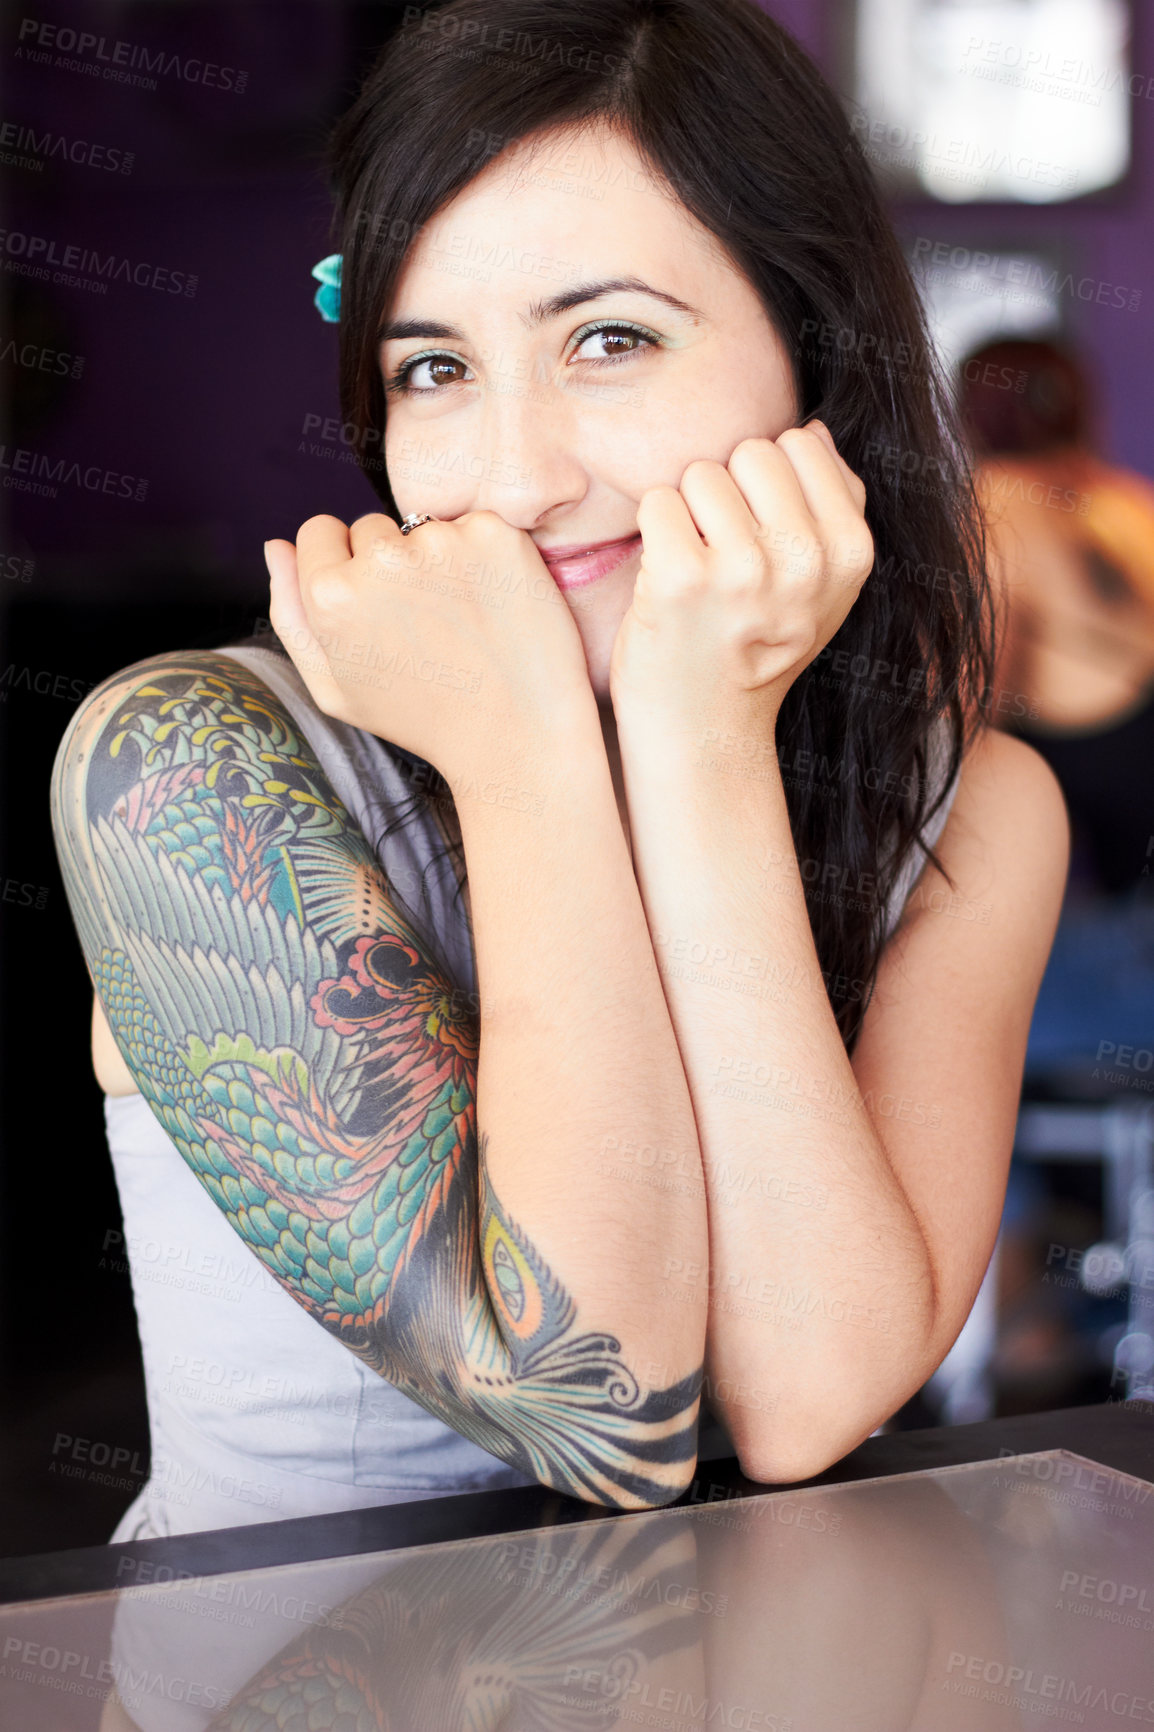 Buy stock photo Portrait of a female tattoo artist showing off her half-sleeve tattoo